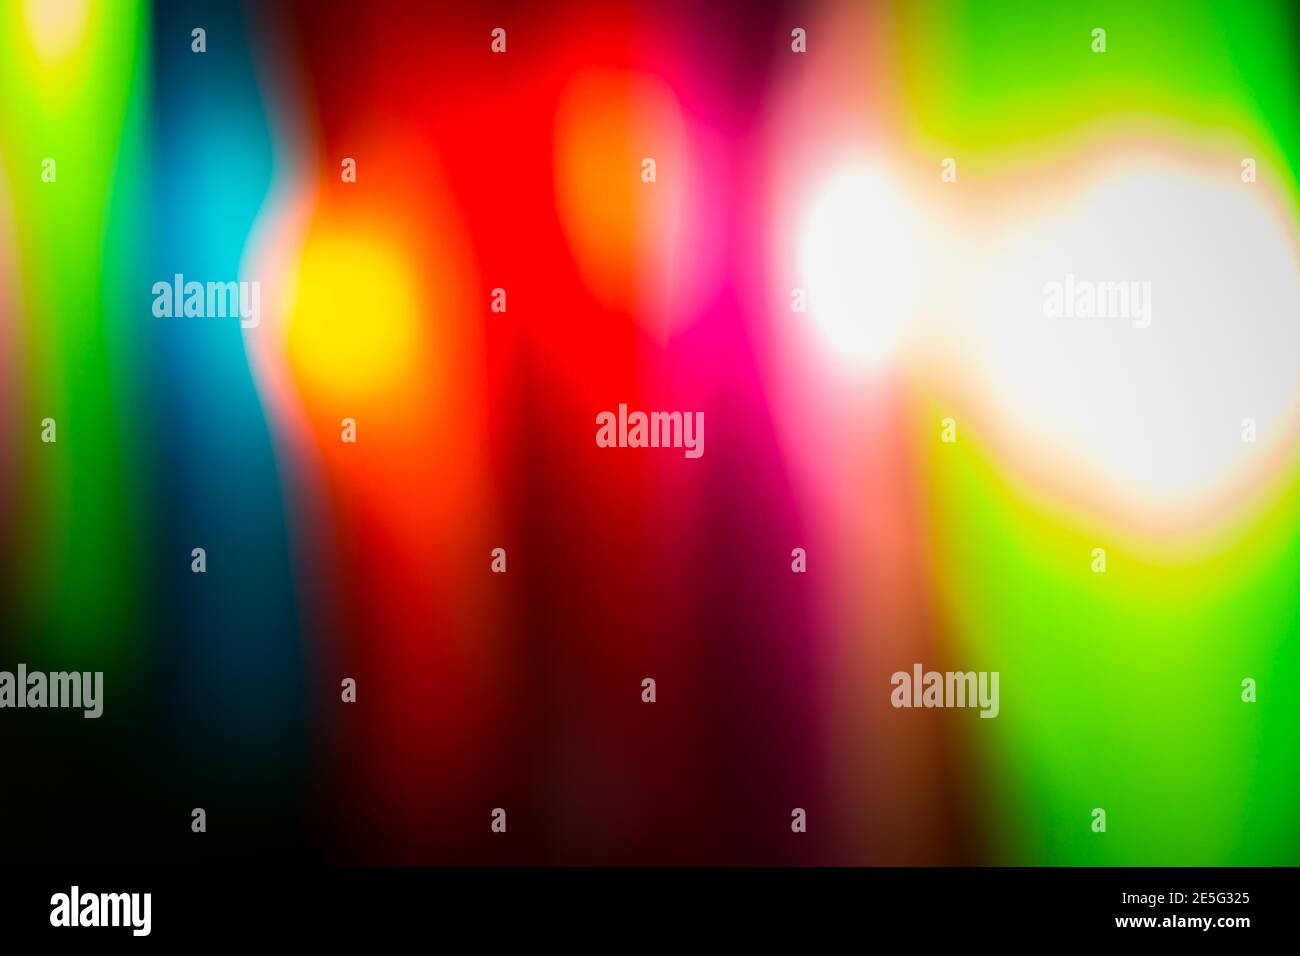 Colorful Soft lights background Stock Photo